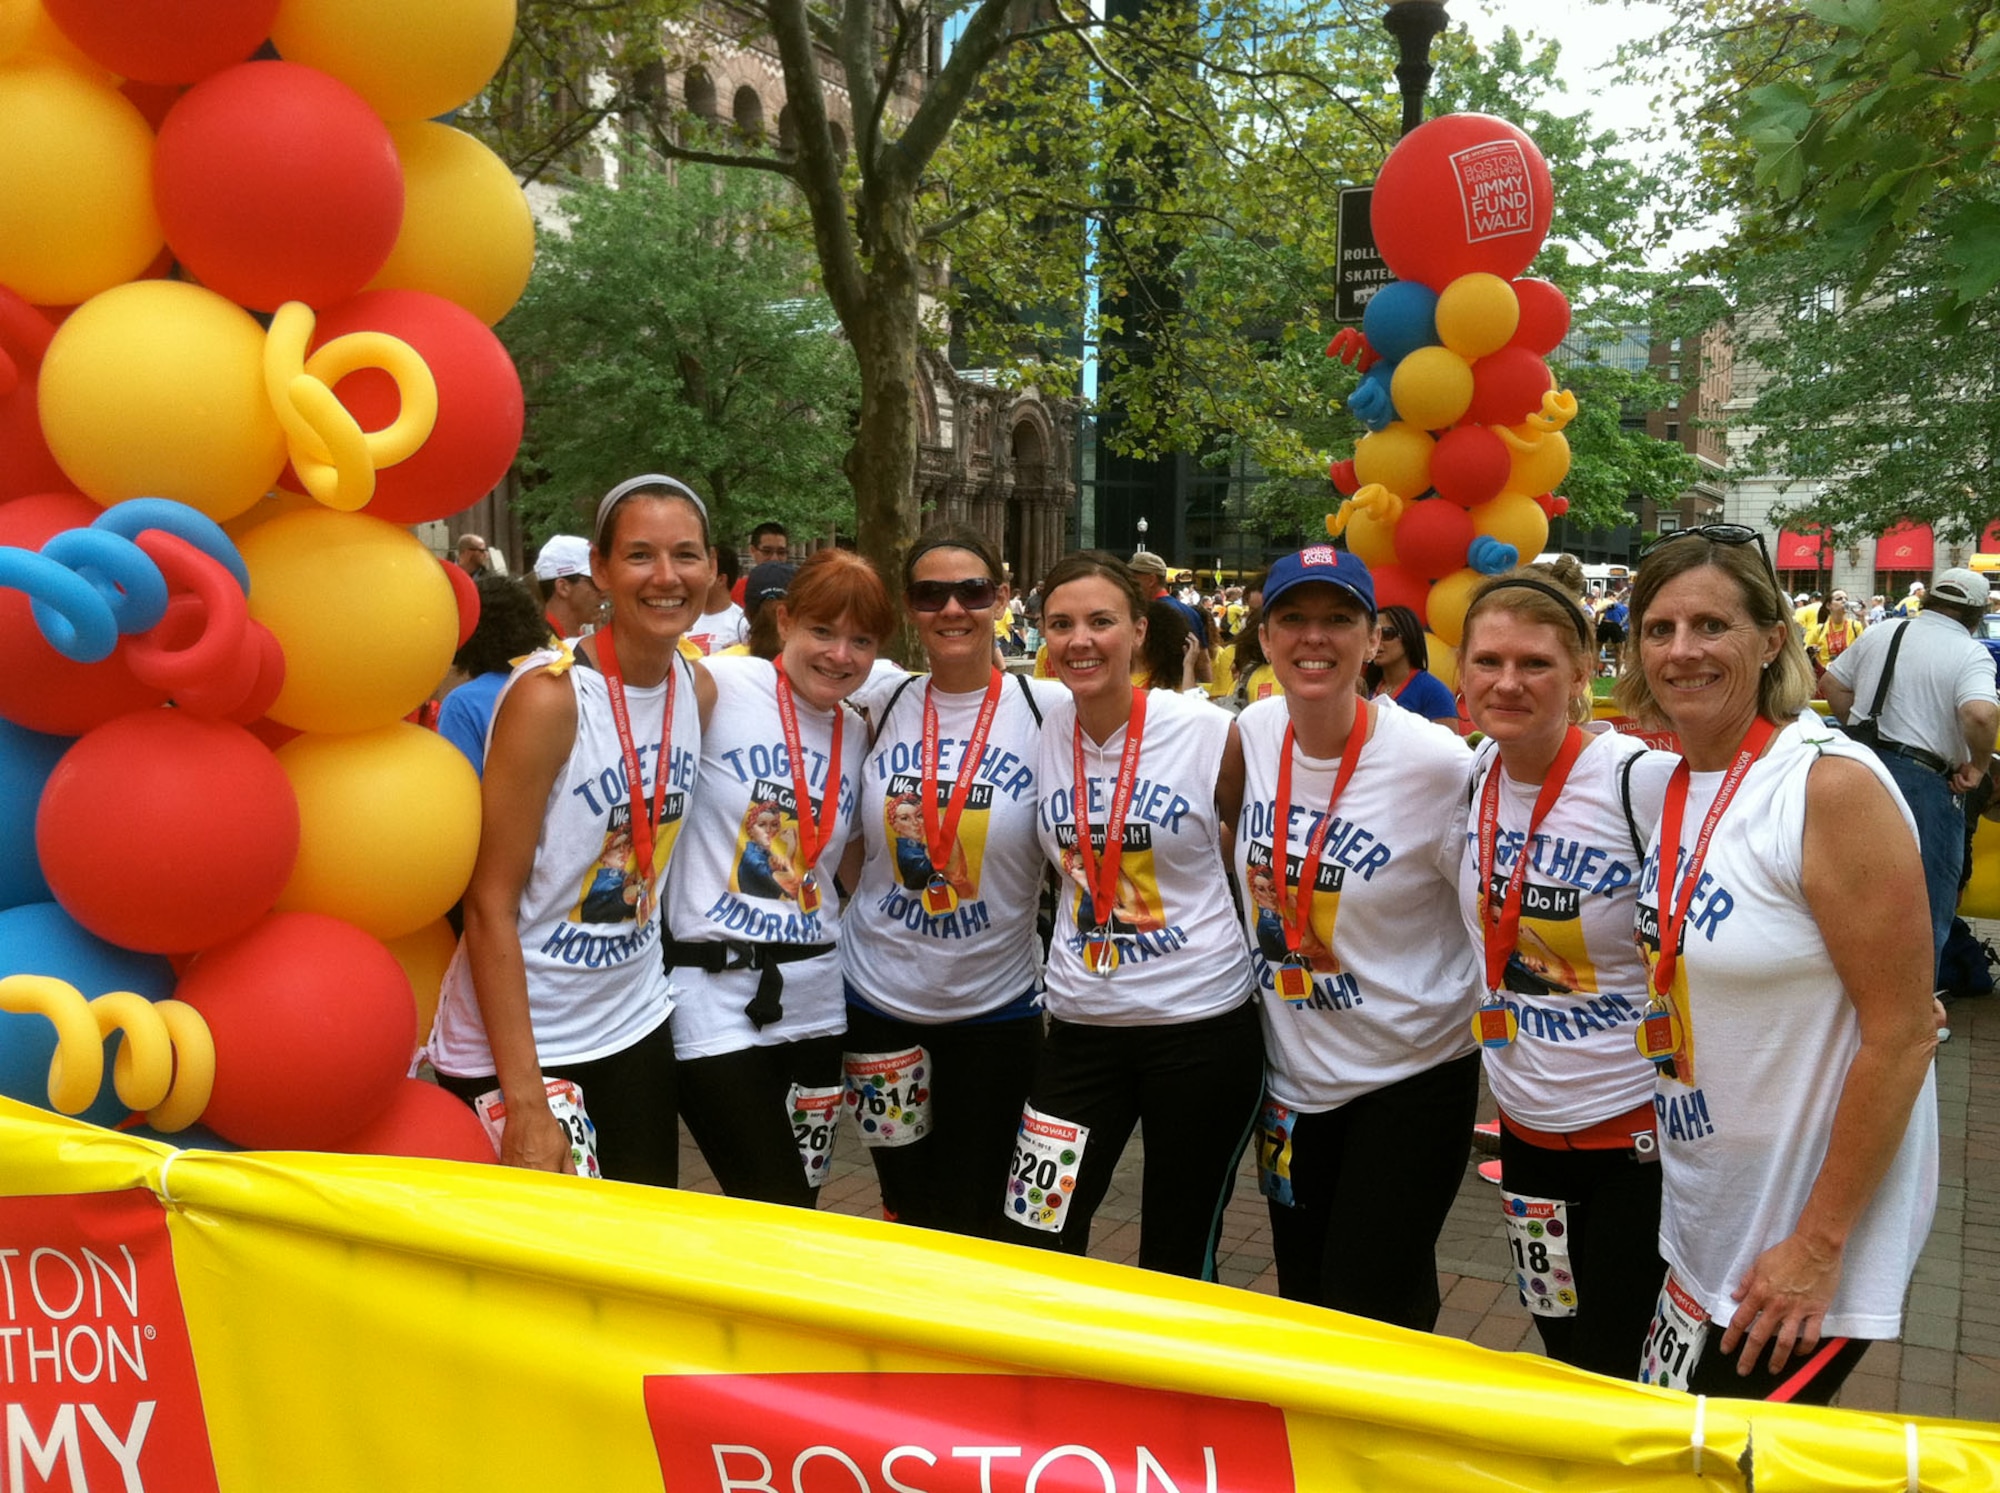 BOSTON — (from left to right) Heather Potter, Samantha McMenamy, Rebecca Alonso, Heather Julseth, Michele Gish, Michal Holl and Barb Hiltz, all members of The Real Housewives of Hanscom, gather together after walking 26.2 miles at the Jimmy Fund Walk in Boston Sep. 9. More than 7,500 walkers participated in the event that supports the fight against cancer in children and adults at Boston’s Dana-Farber Cancer Institute. (Courtesy photo)